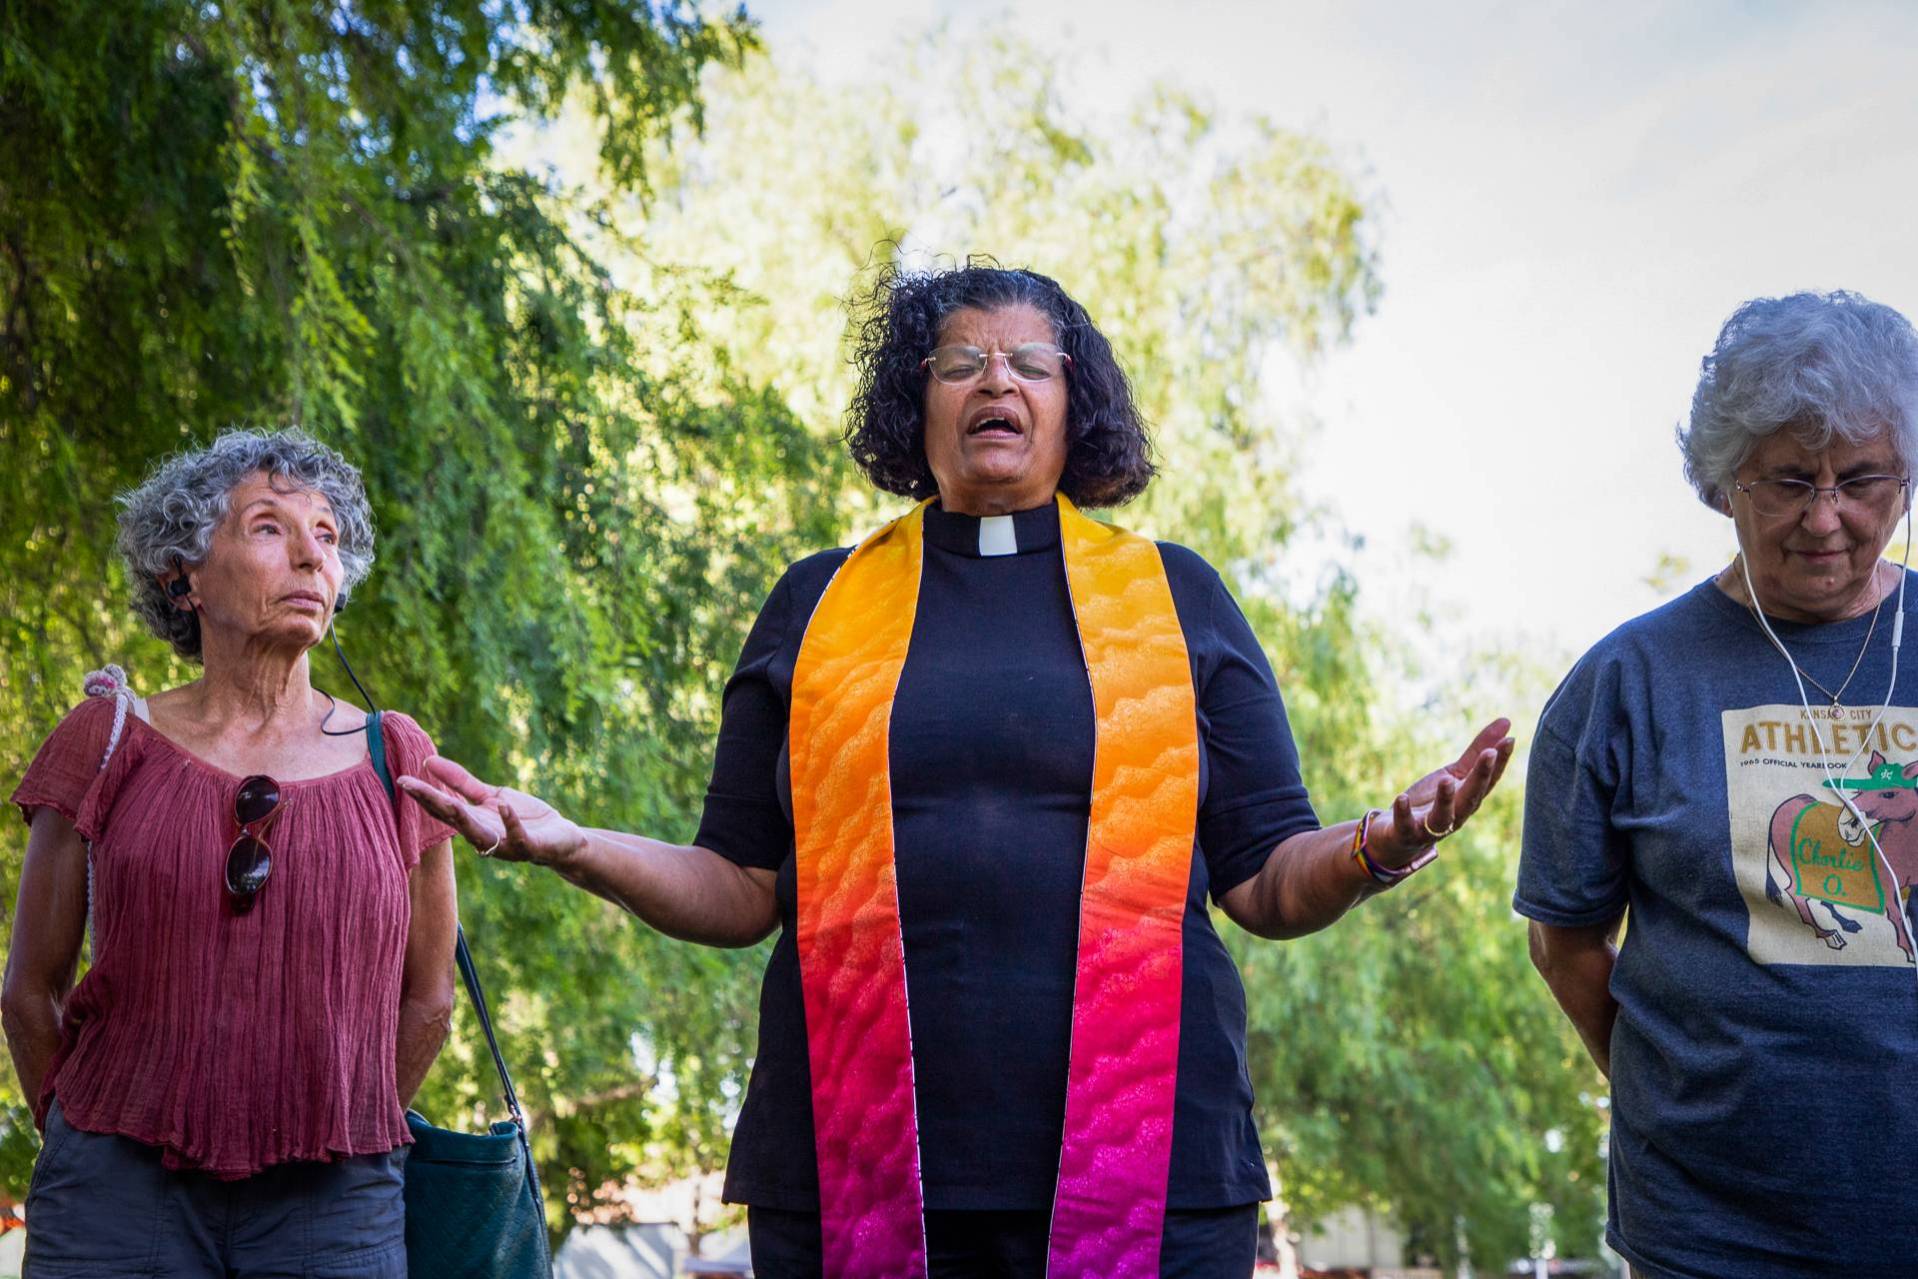 Three people stand in a row outdoors before a backdrop of lush, green trees. The woman in the center, a middle-aged Latina with curly, shoulder-length black hair and wireless glasses, wears a short-sleeved black cassock with a white clerical collar, and a bright stole of a warm yellow that turns to orange, then pink, then purple on both sides. She has her eyes closed and her arms held out, palms up, and appears to be speaking. On both sides of her stands a middle-aged women, one with short gray hair, the other with white gray hair. Both are dressed casually in short-sleeved tops. The woman to her right stands slightly behind her, looking at her as she speaks, sunglasses tucked into her rose T-shirt and a purse hanging from one shoulder. The woman on her left bows her head, hands behind her back, the white wires of headphones coming from both ears.